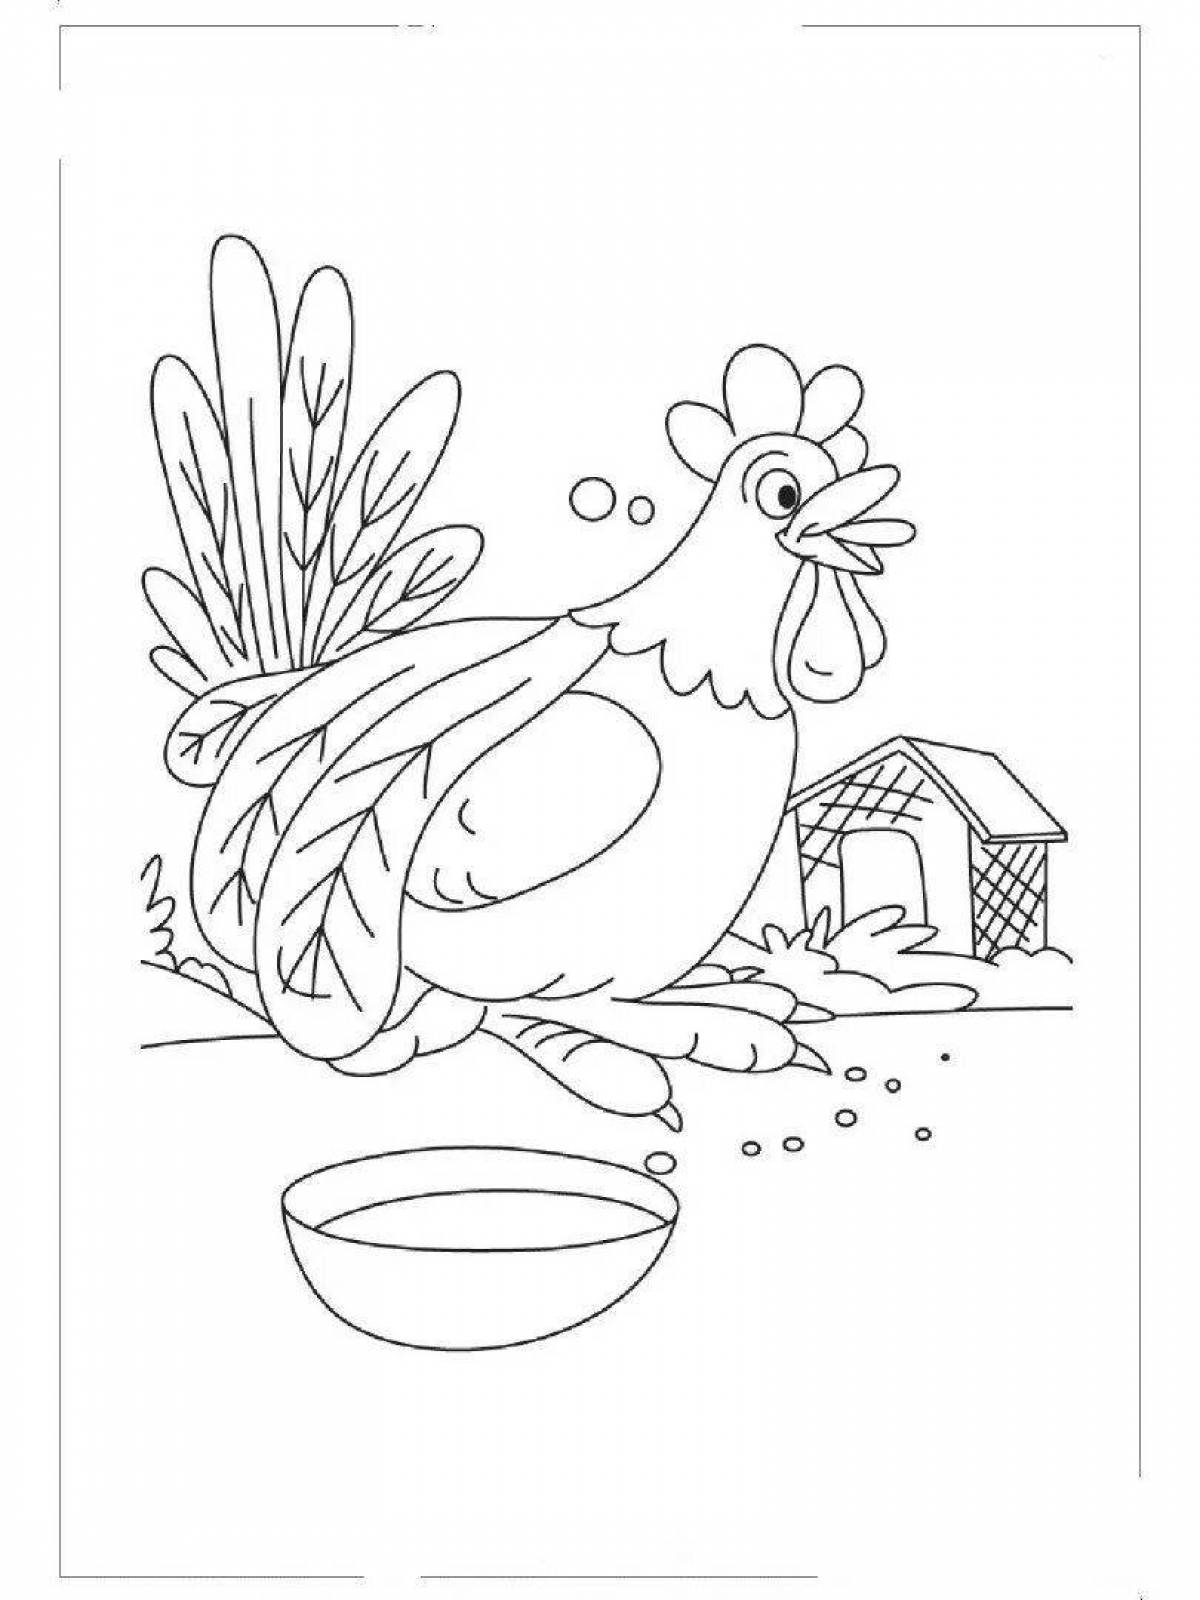 Funny grains for chicken coloring